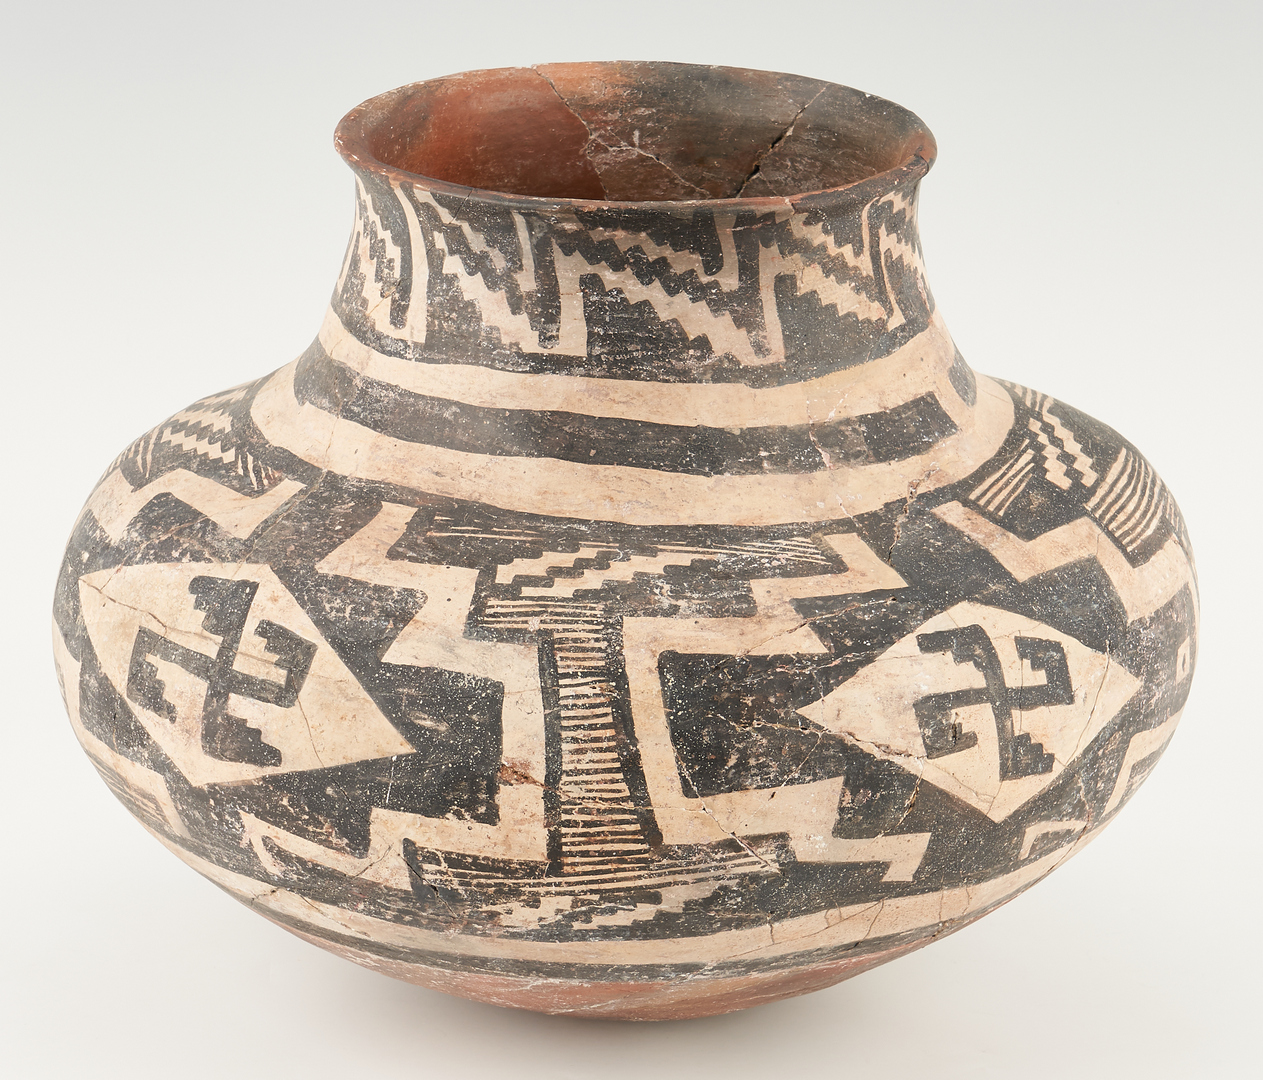 Lot 685: Large Early Anasazi Pottery Olla, Black & White on Red